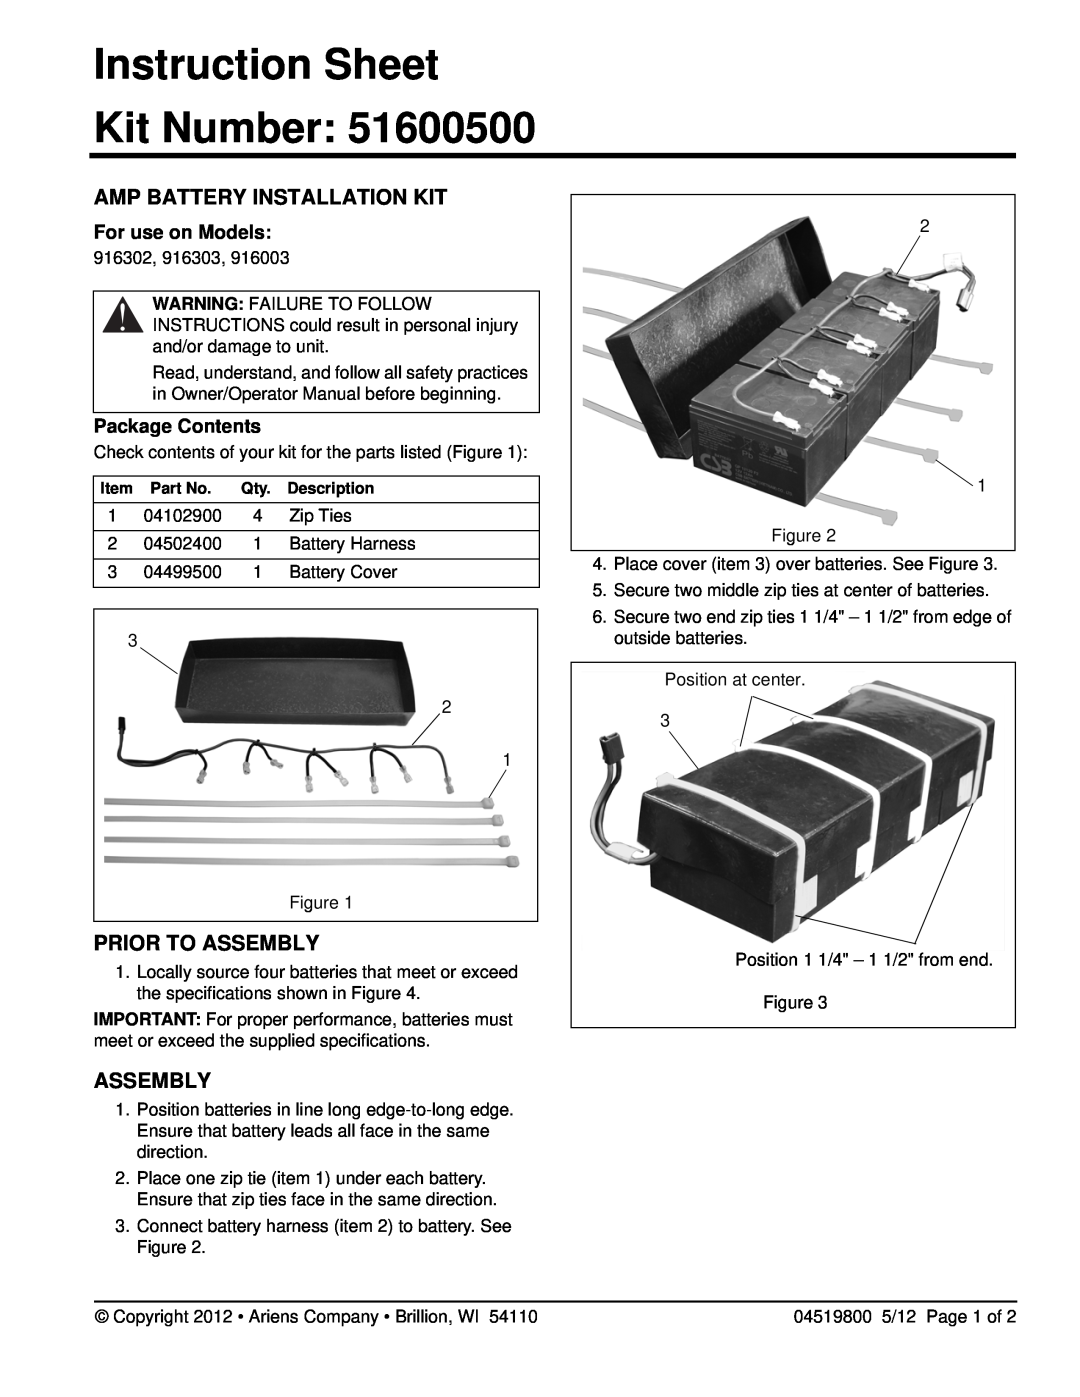 Ariens 916003, 916303 Amp Battery Installation Kit, For use on Models, Instruction Sheet Kit Number, Prior To Assembly 